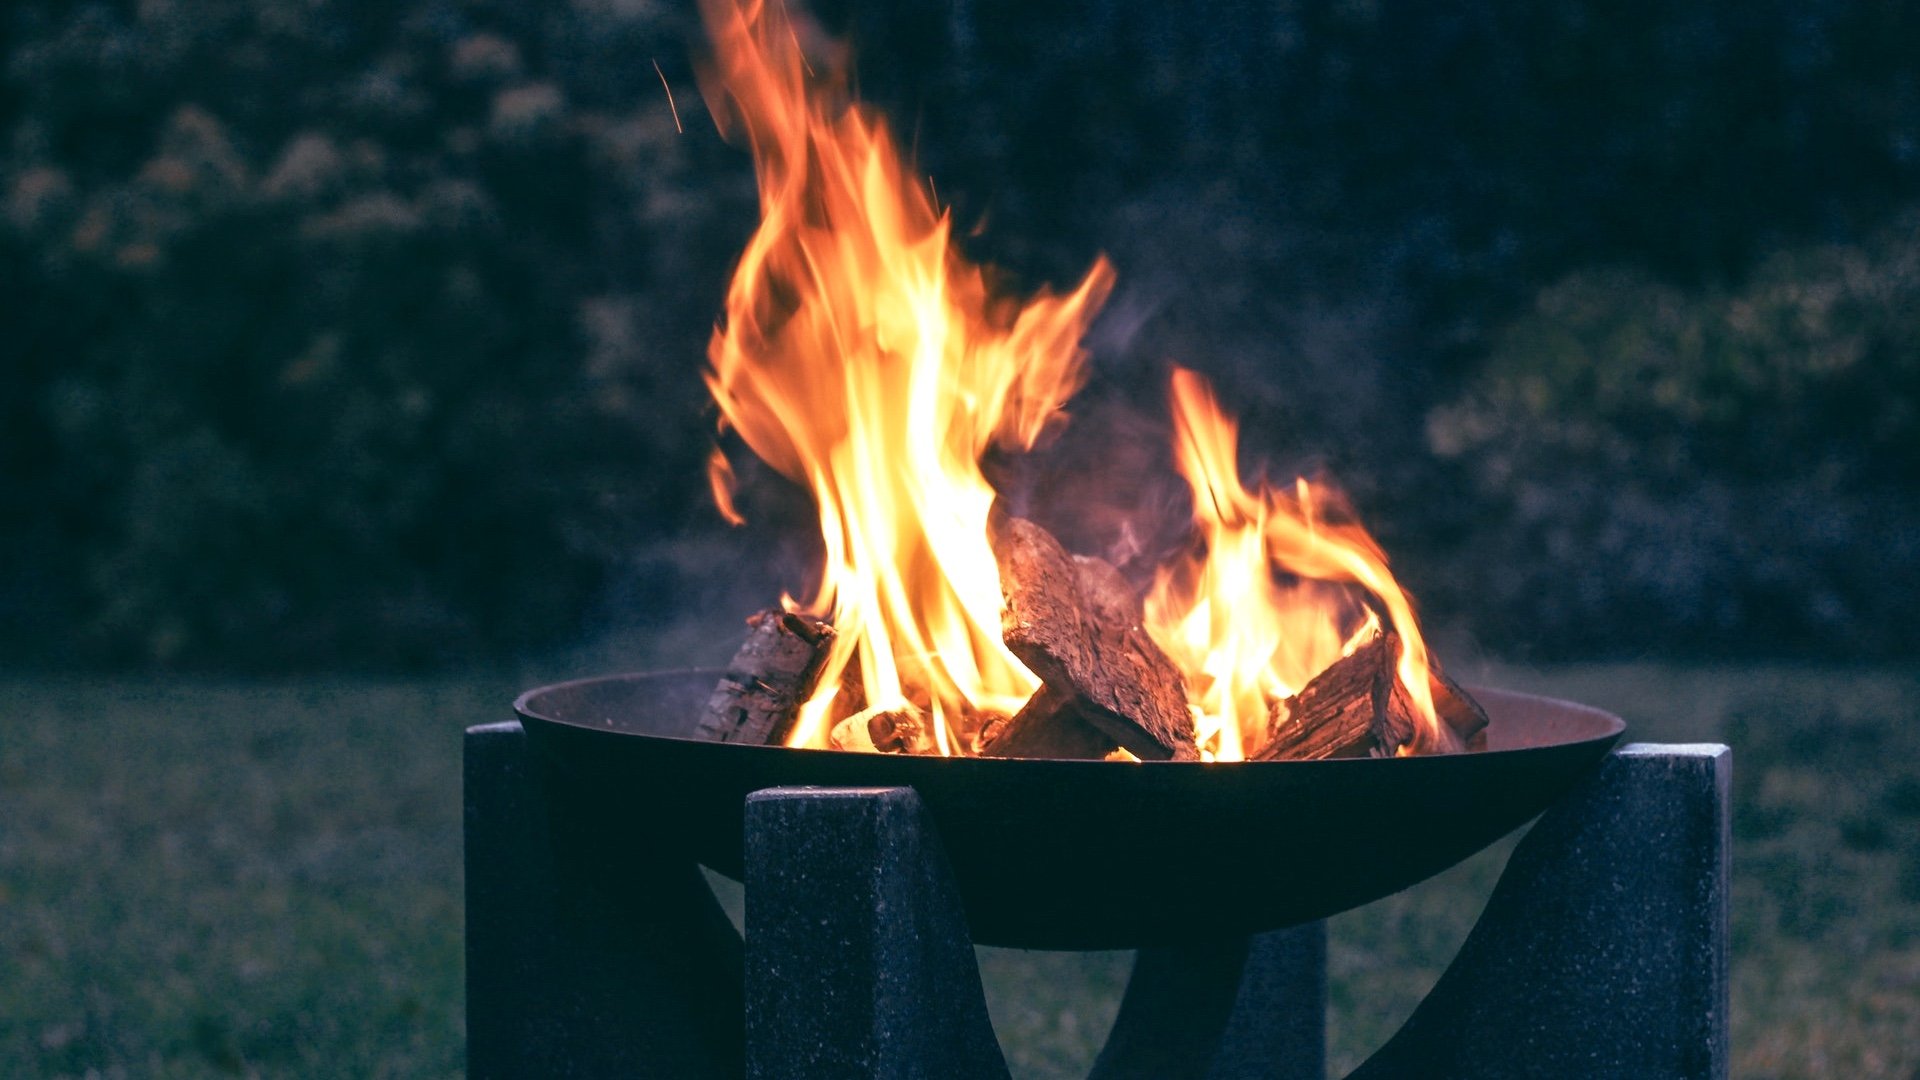 Fire Pits Are Not Permitted Heaters, Az Fire Pit Laws